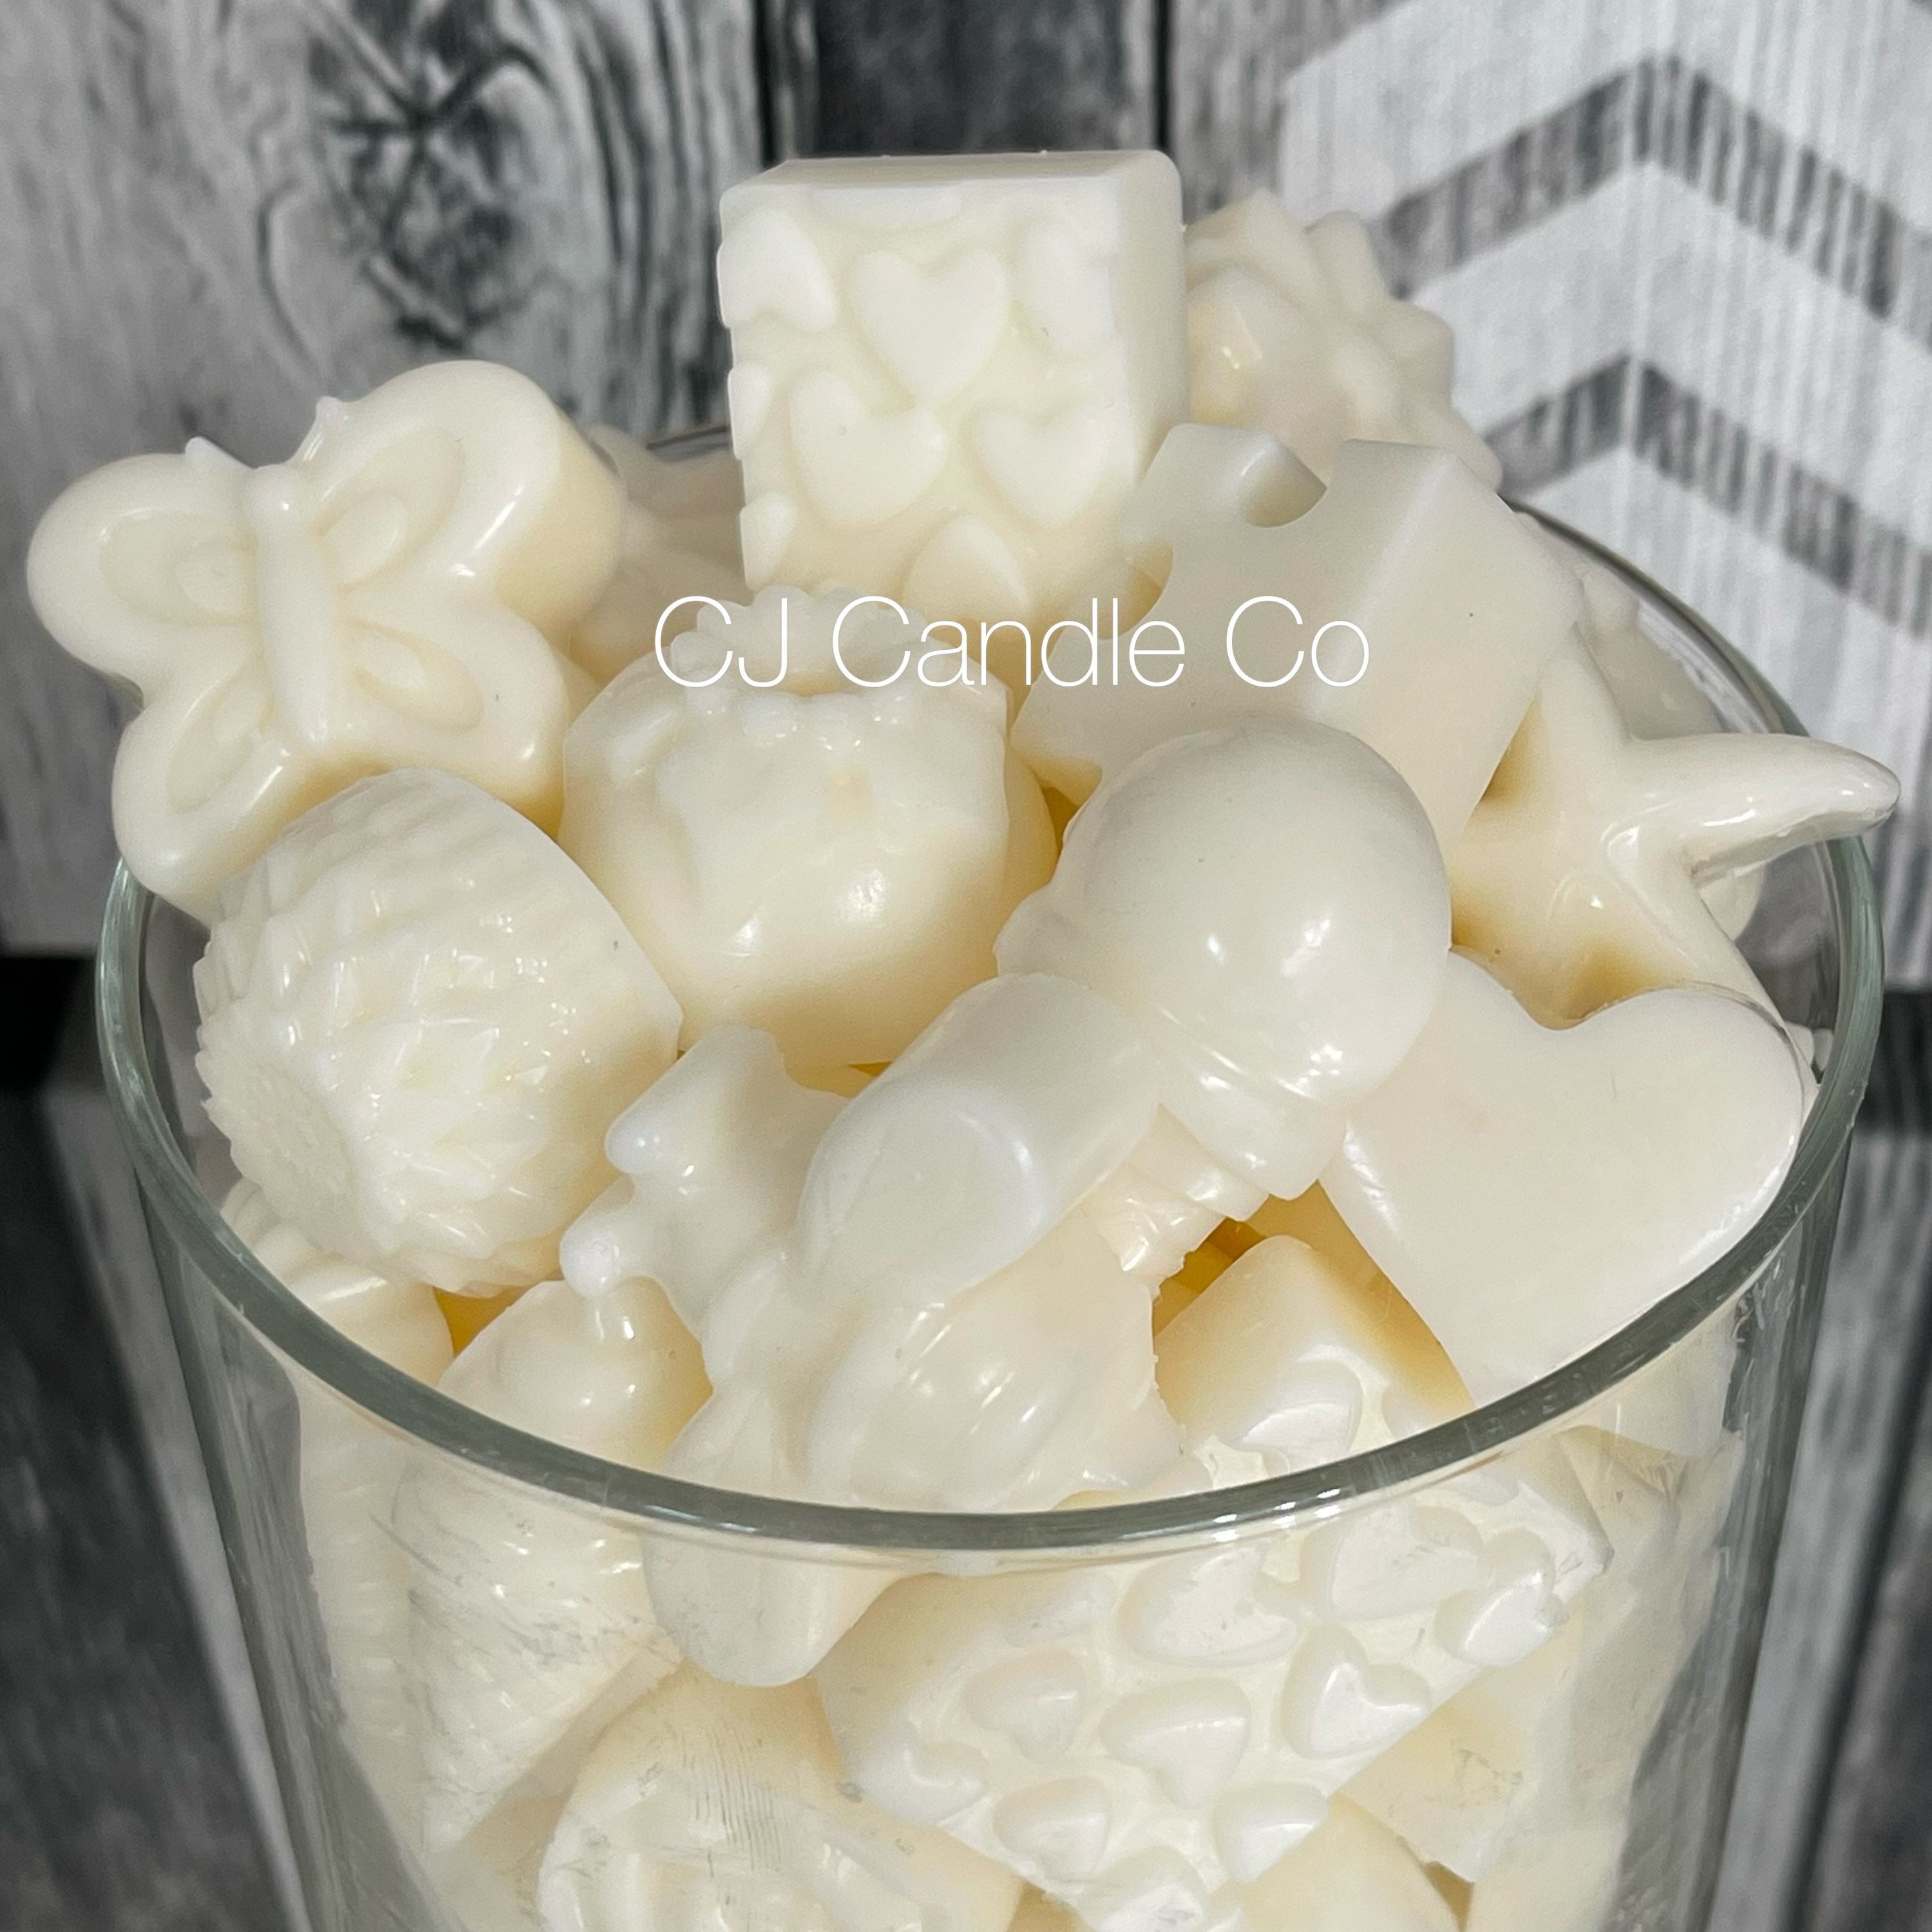 Coffee Wax Melts in Coffee Cup/coffee Bean Scented Soy Wax Melts